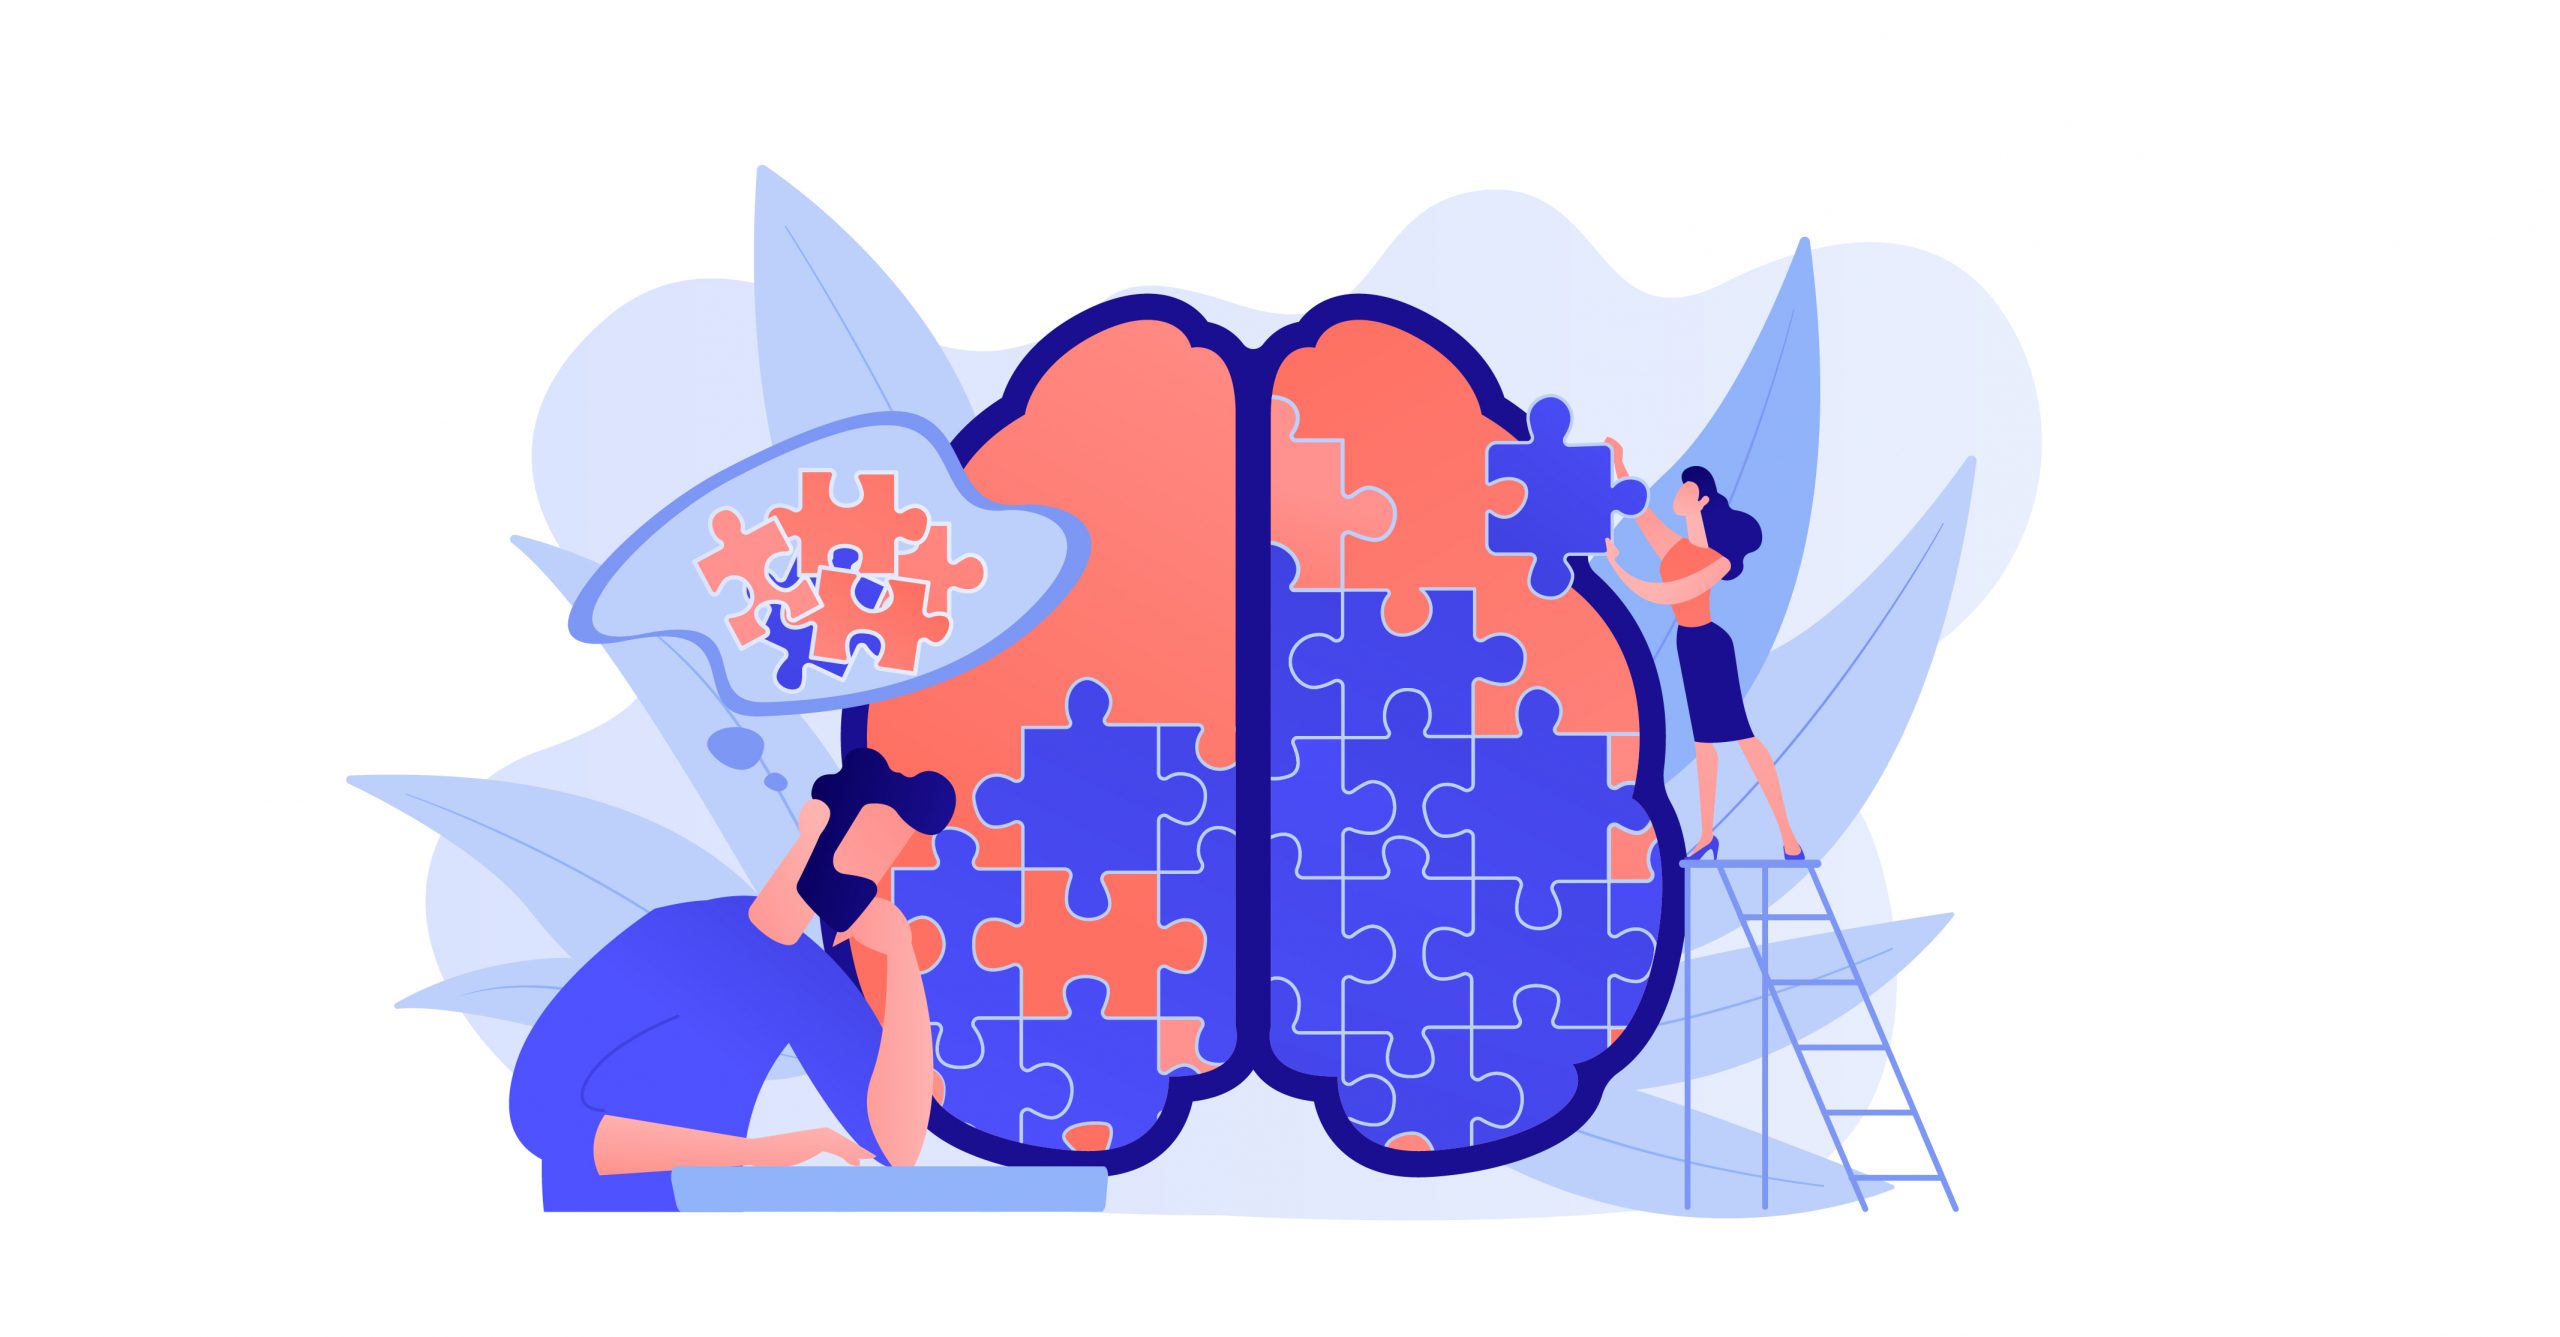 Illustration depicting strategies to manage cognitive load in online learning, including reducing extraneous information, leveraging existing knowledge, and using visuals for better comprehension.